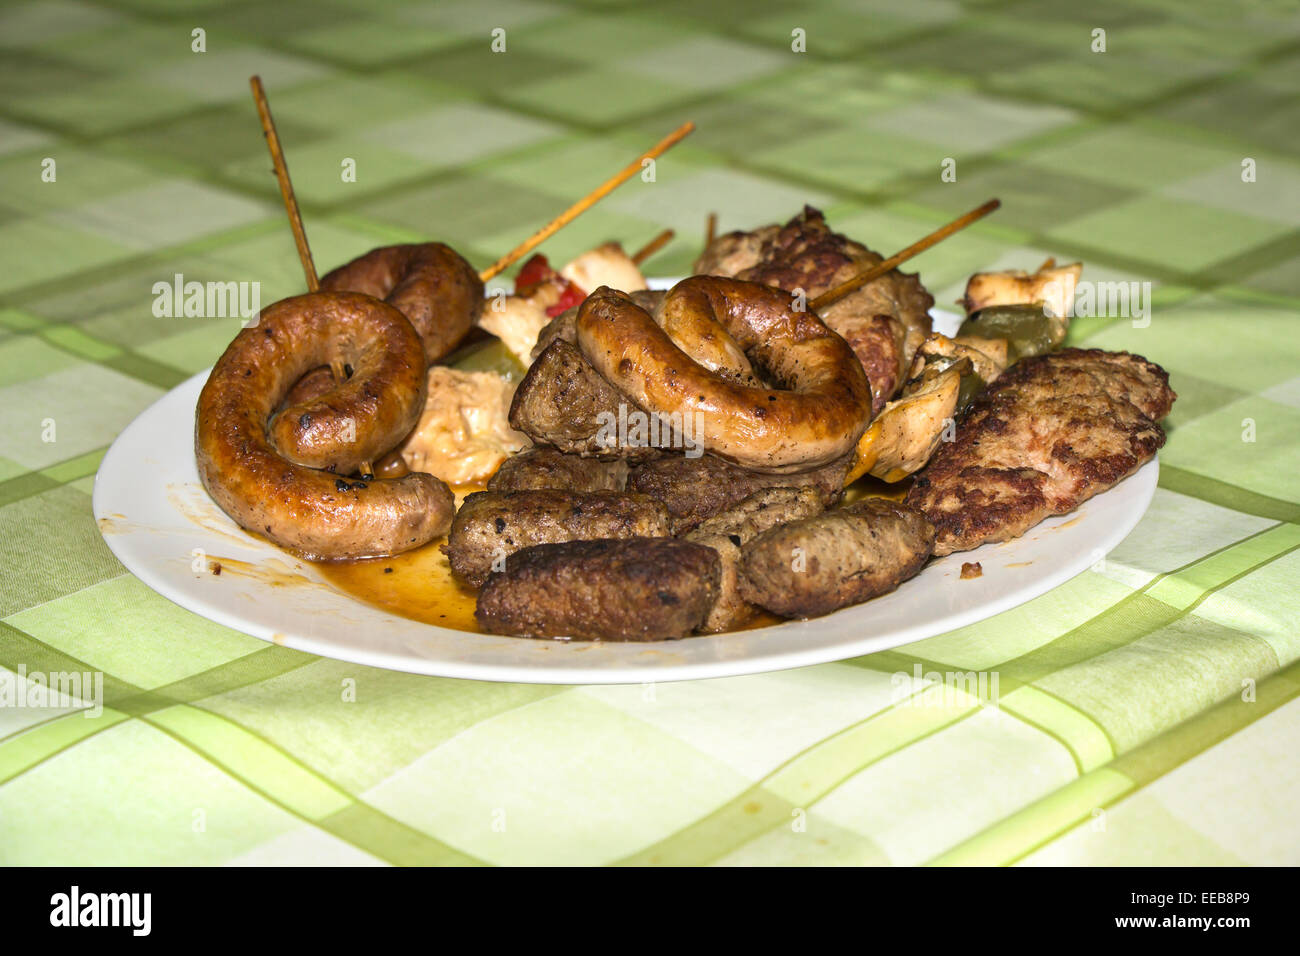 Sausage steak mixed meat grilled on a plate Stock Photo